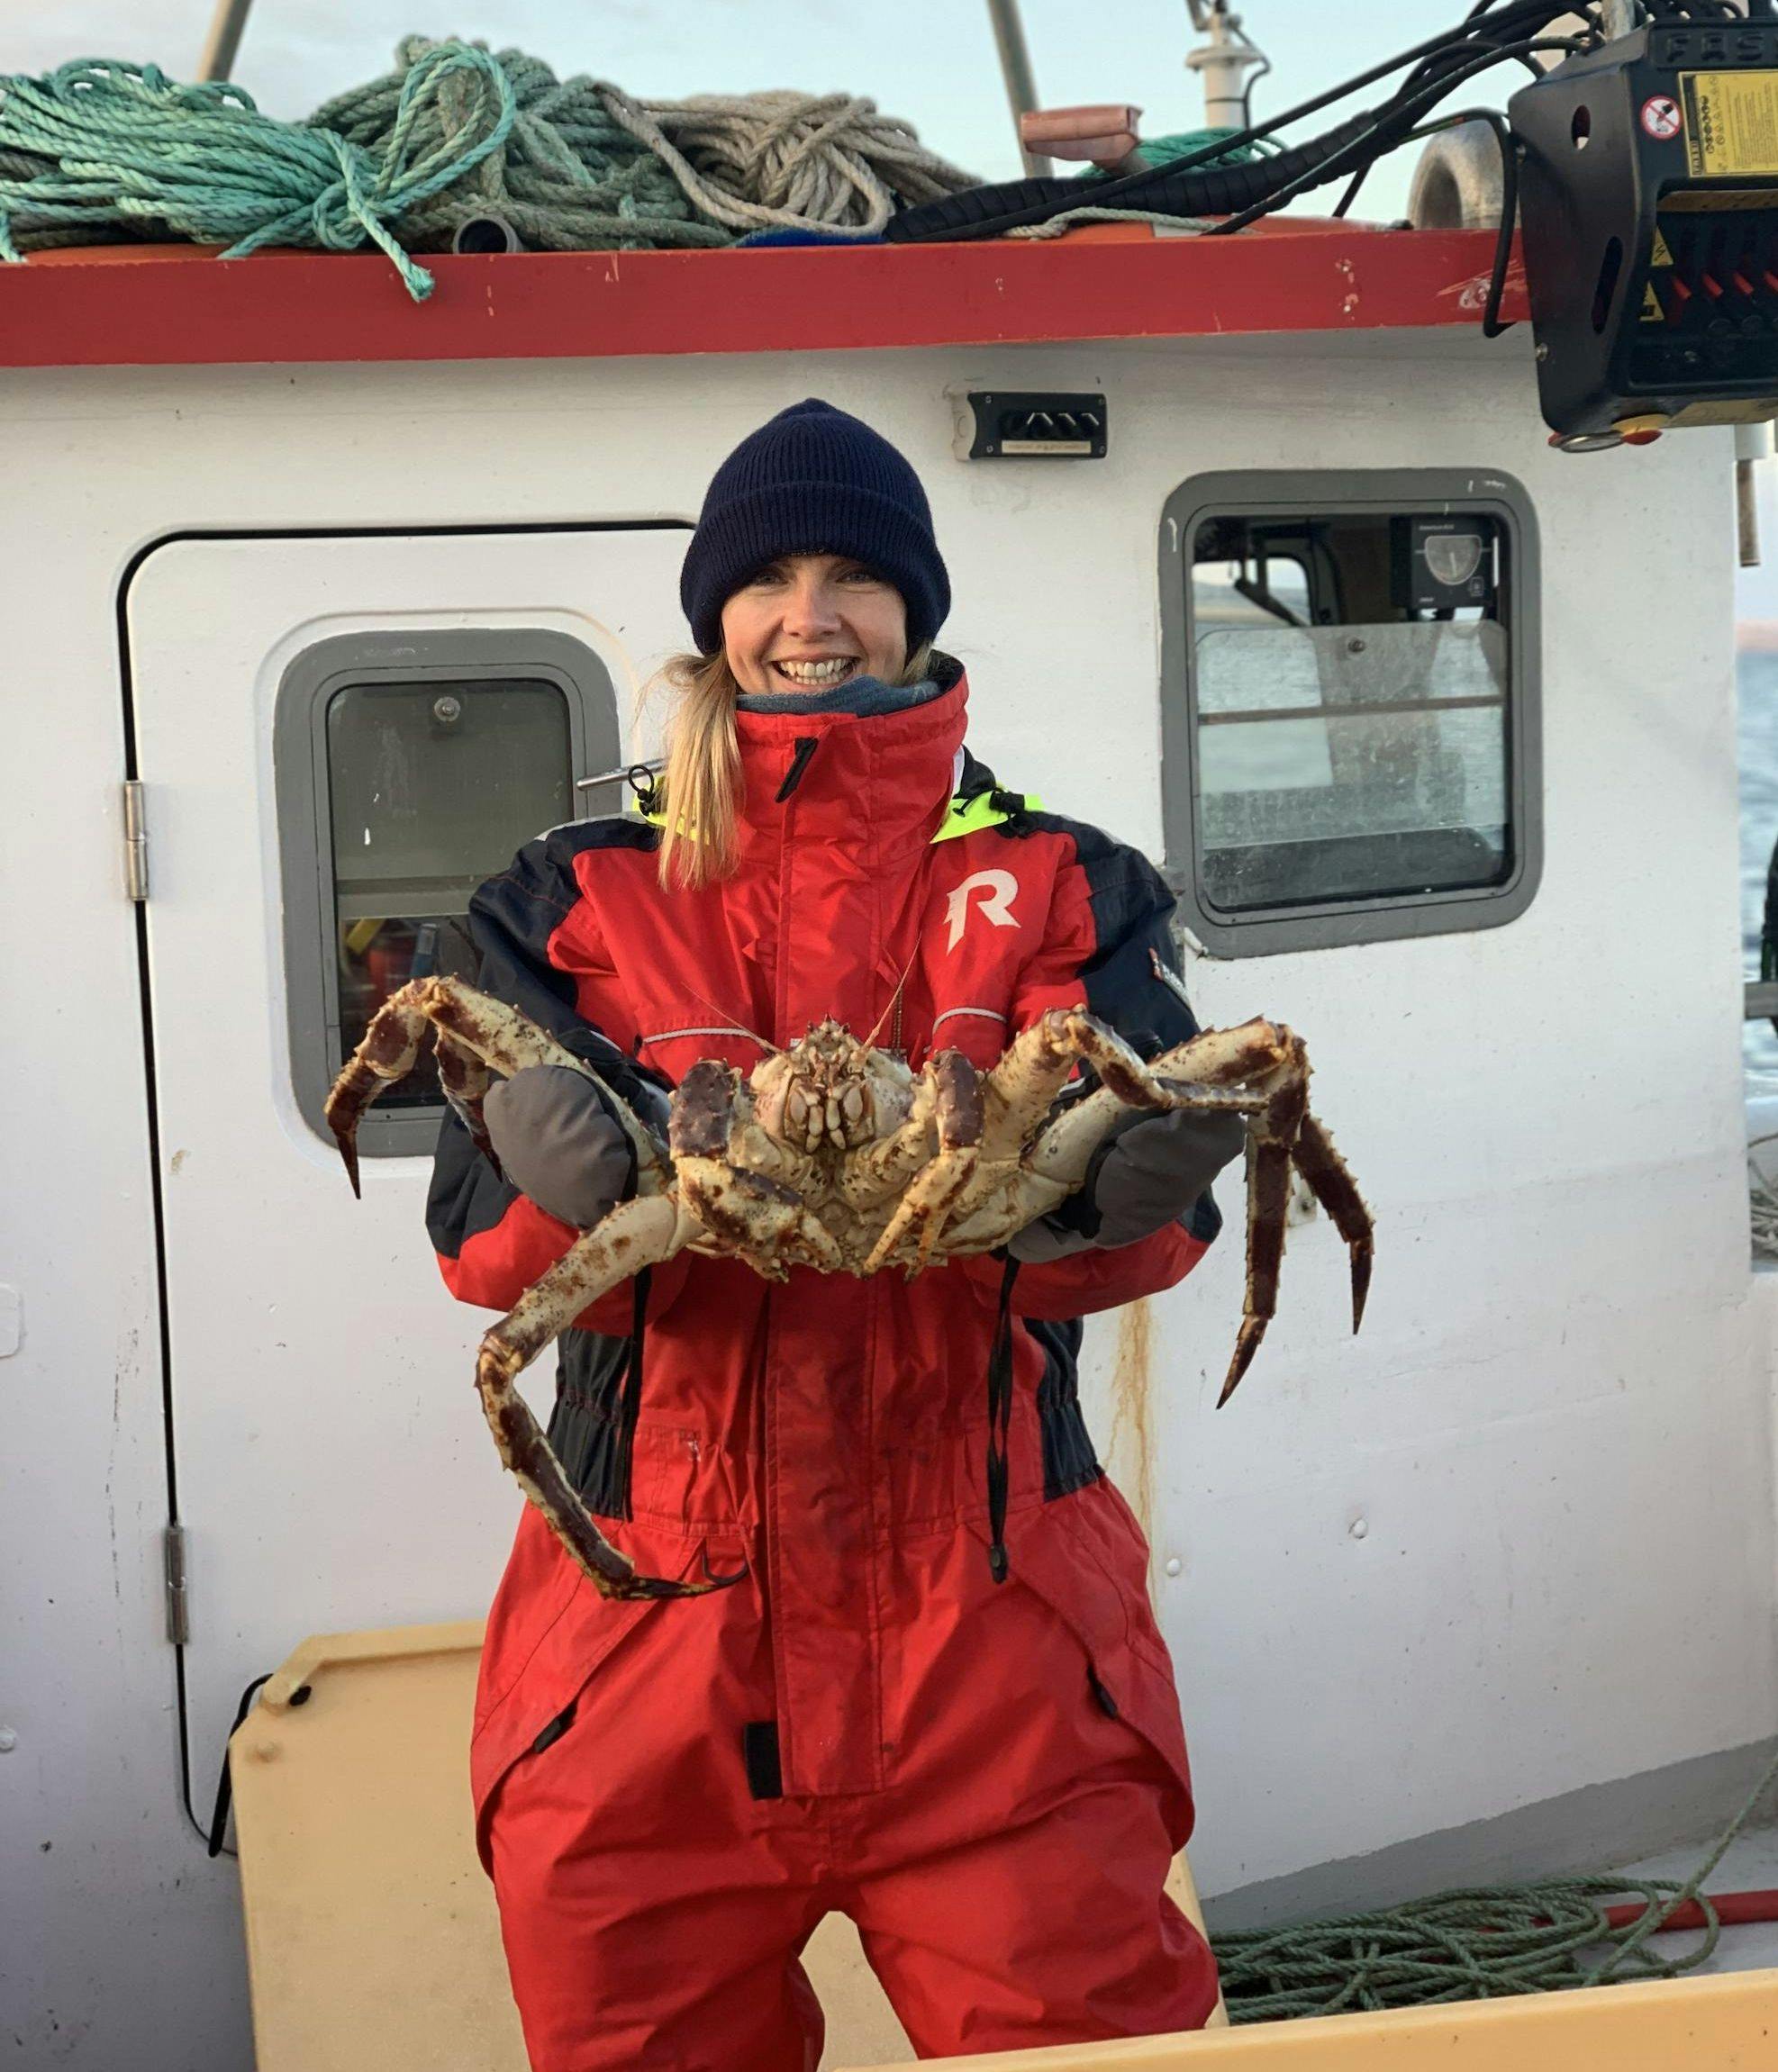 Fishing with a real king crab fisherman